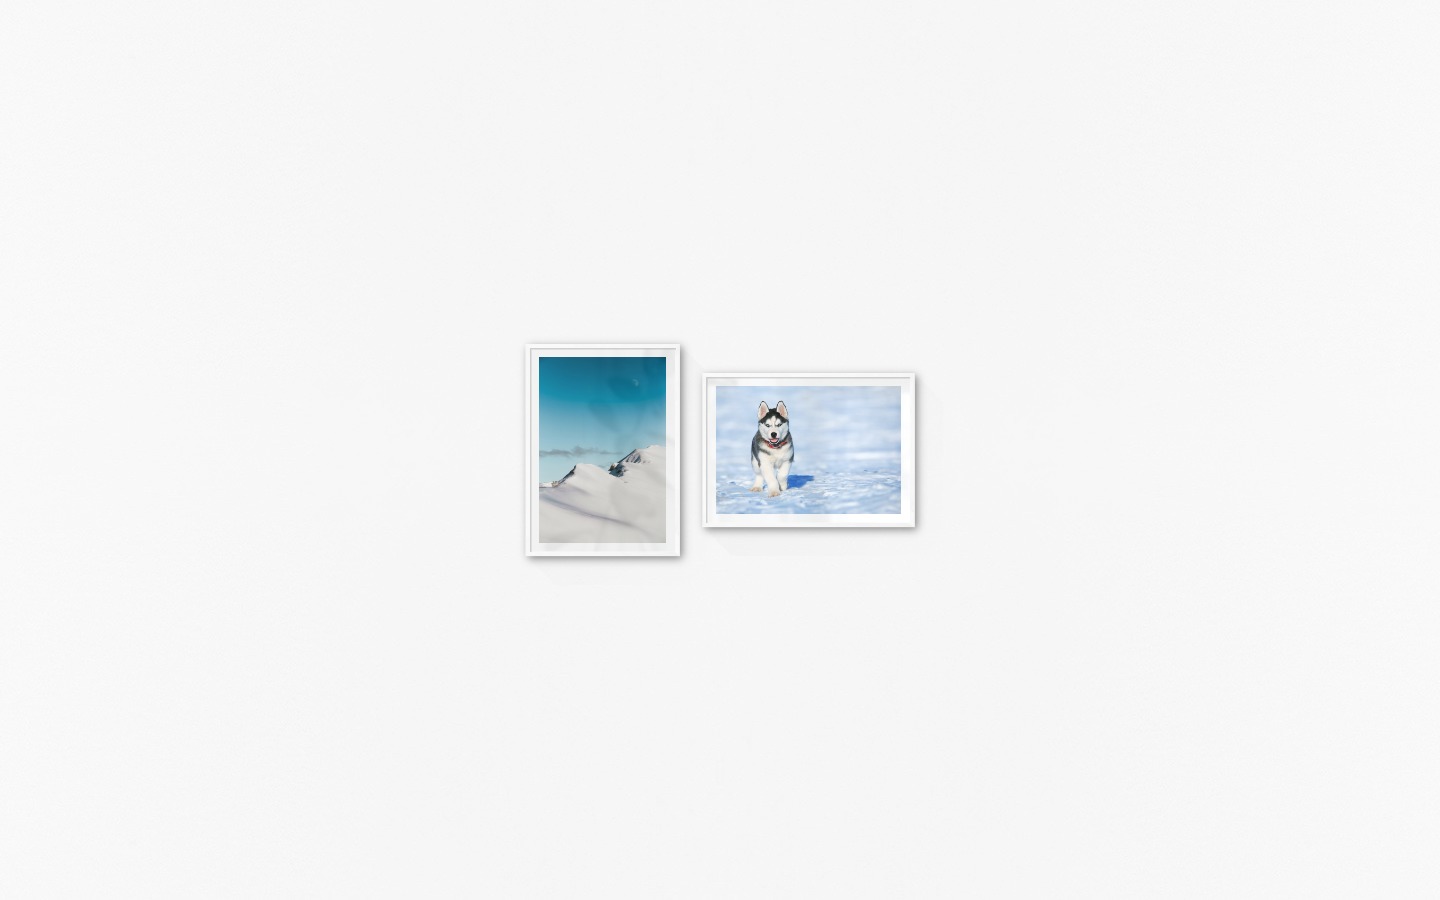 Gallery wall with picture frames in white in sizes 50x70 with prints "Snowy mountain peaks" and "Husky"